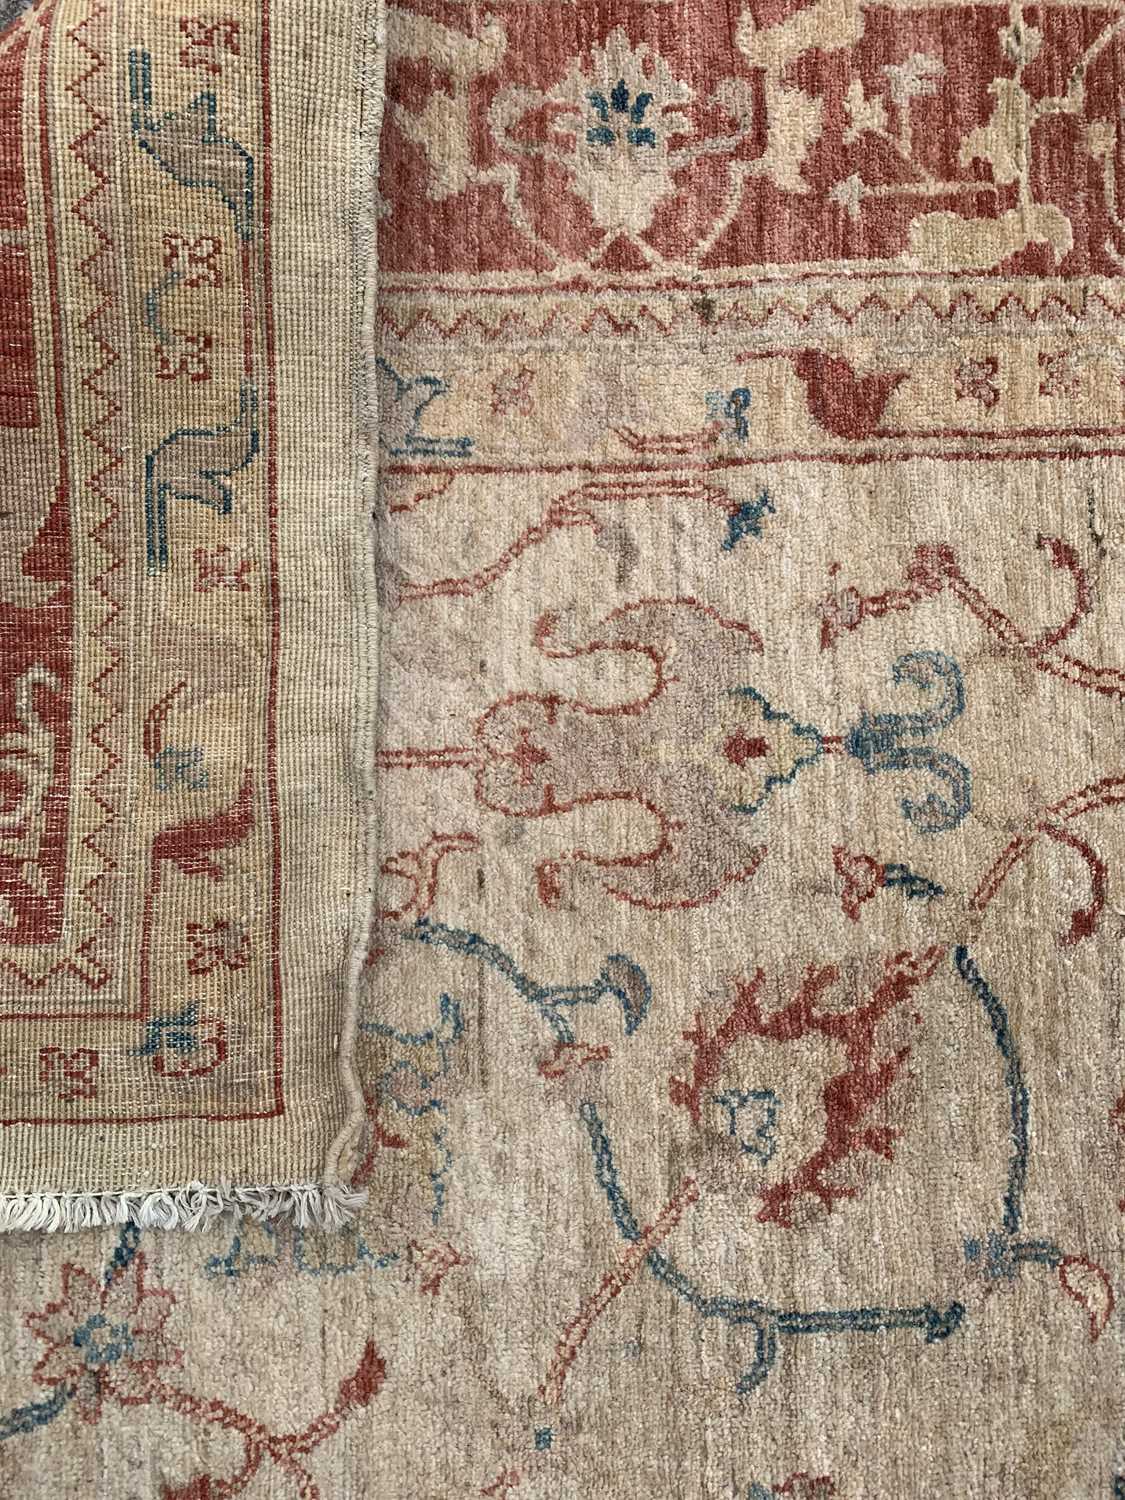 ANTIQUE EASTERN STYLE WOOLLEN RUG - cream ground with a red border and multi-patterned throughout, - Image 2 of 2